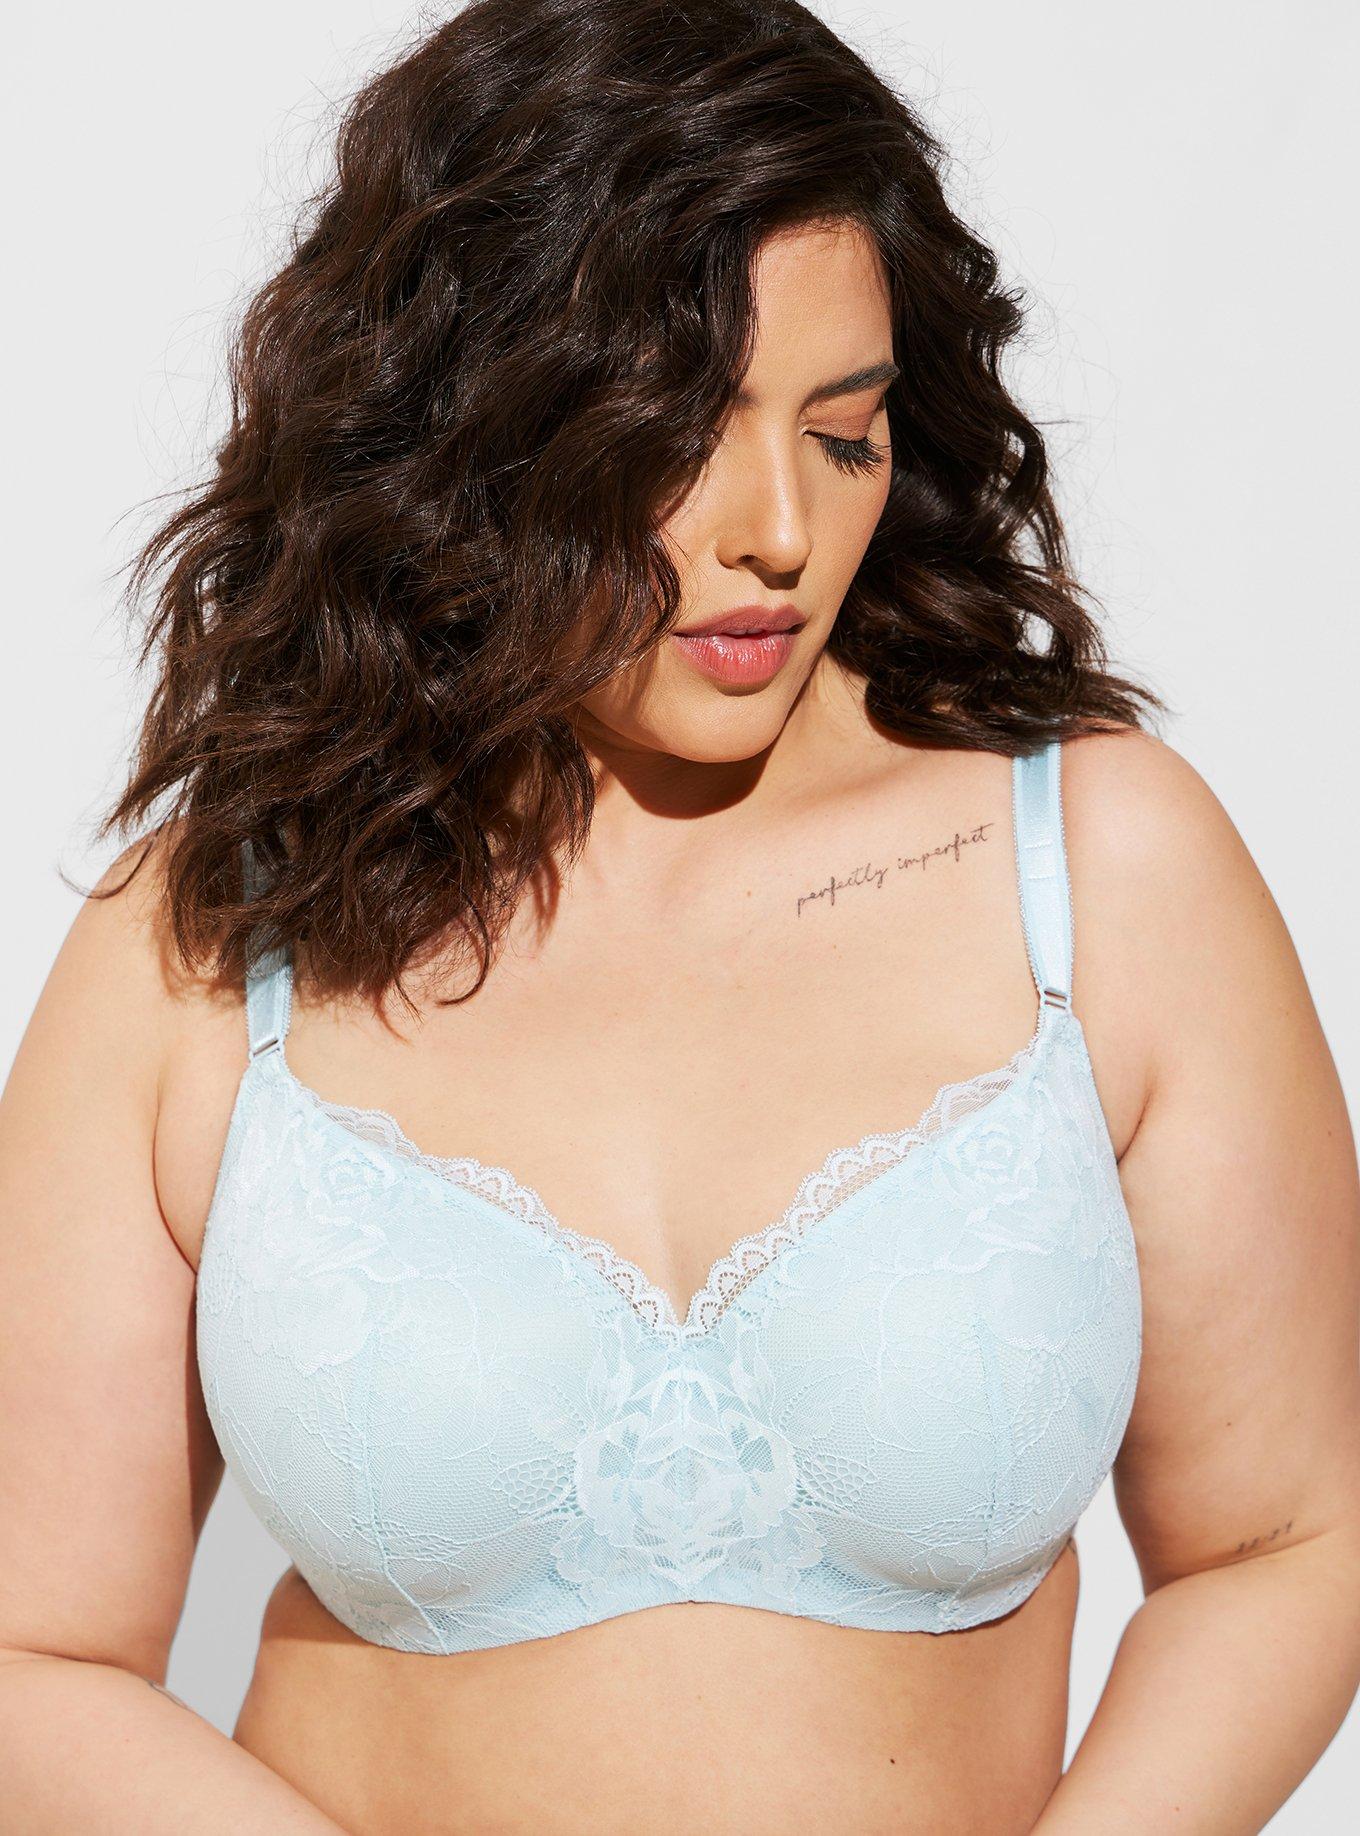 Plus Size - Full-Coverage Balconette Lightly Lined Two Tone Lace